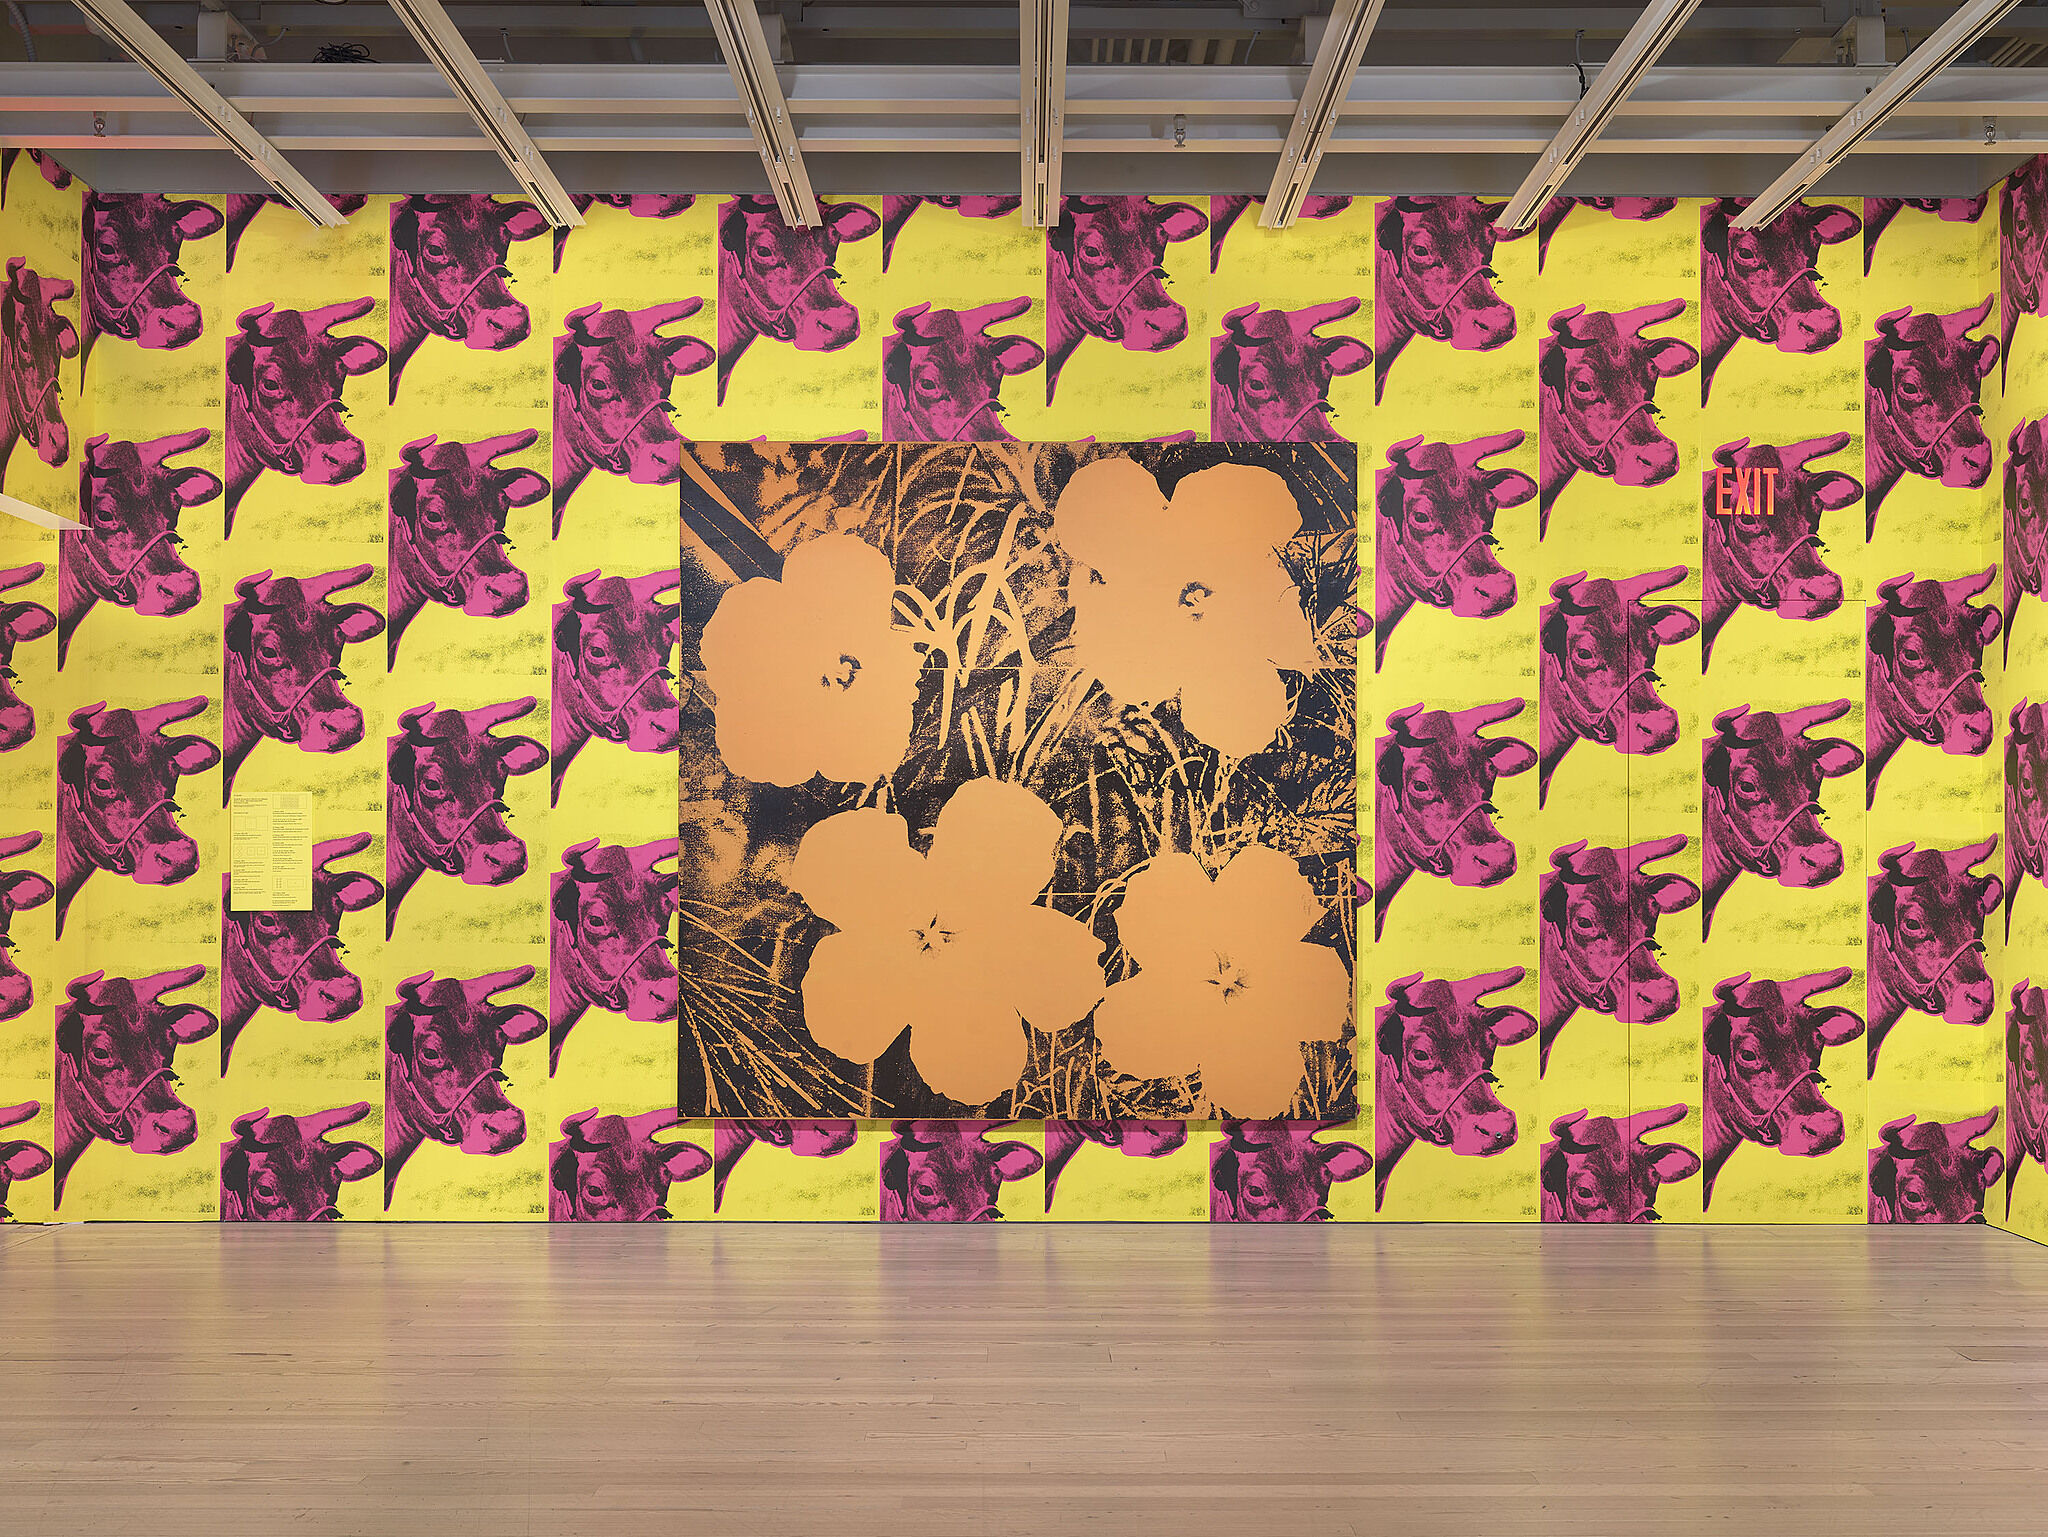 Whitney Museum of American Art / Andy Warhol—From A to B and Back Again